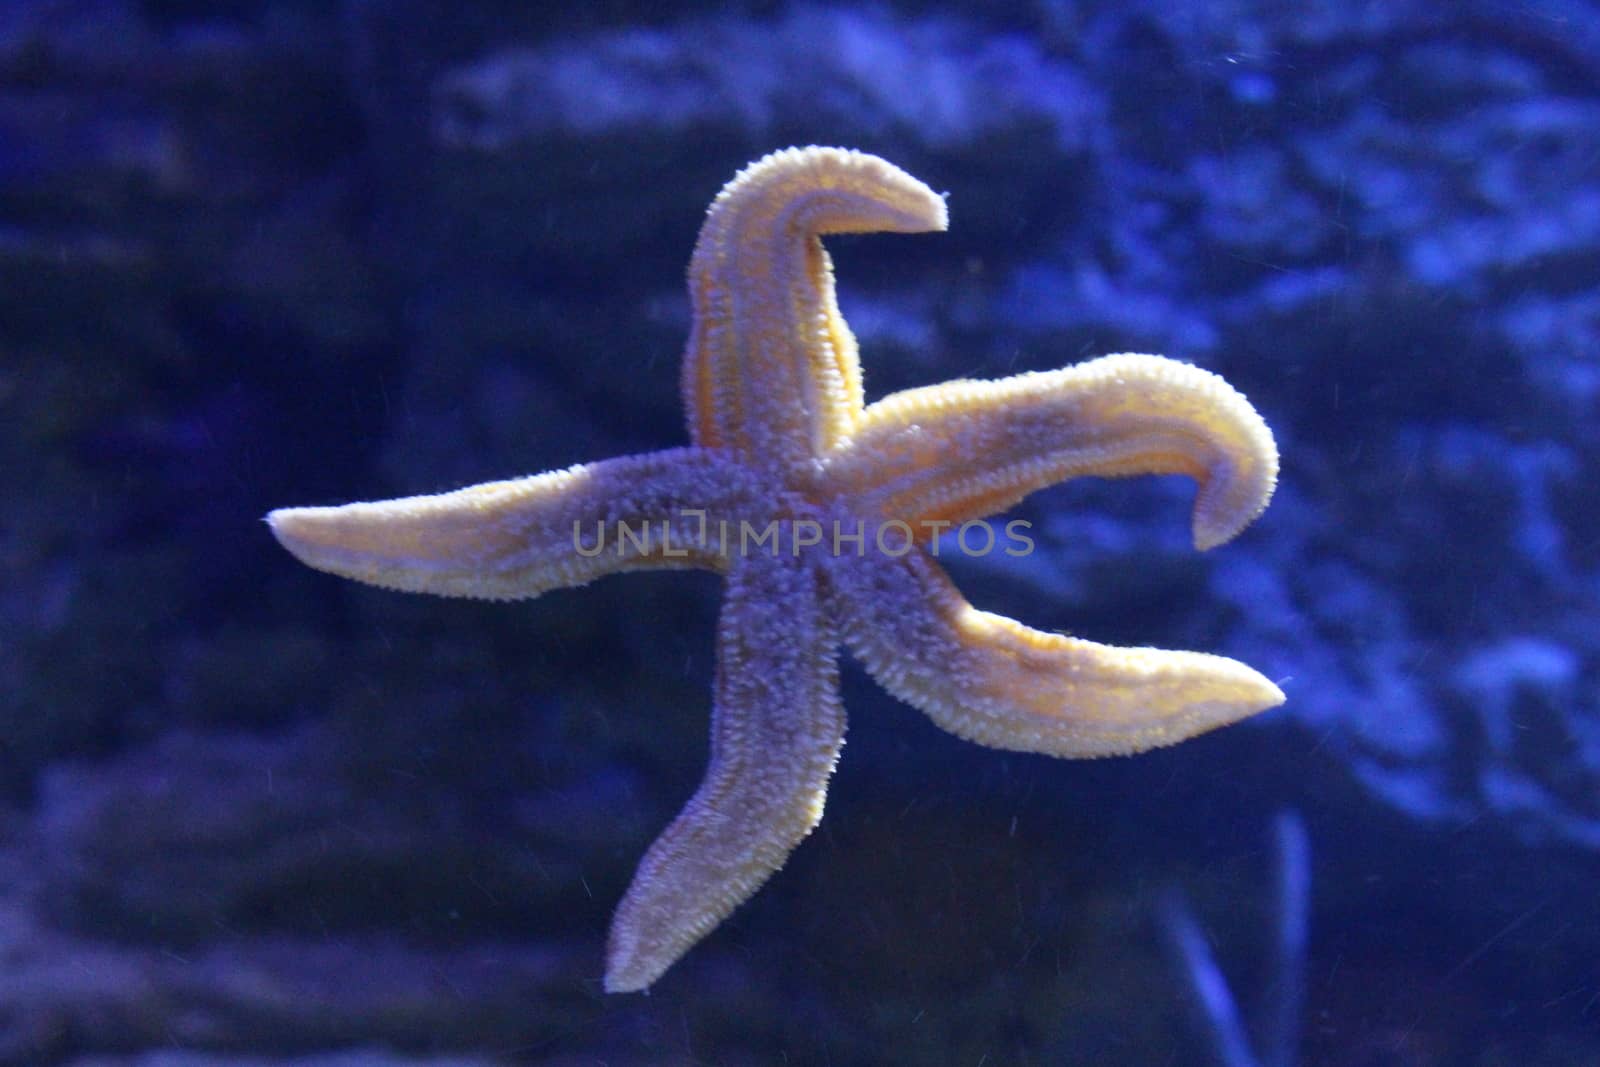 Starfish in clear water. Sea inhabitants of the Earth.